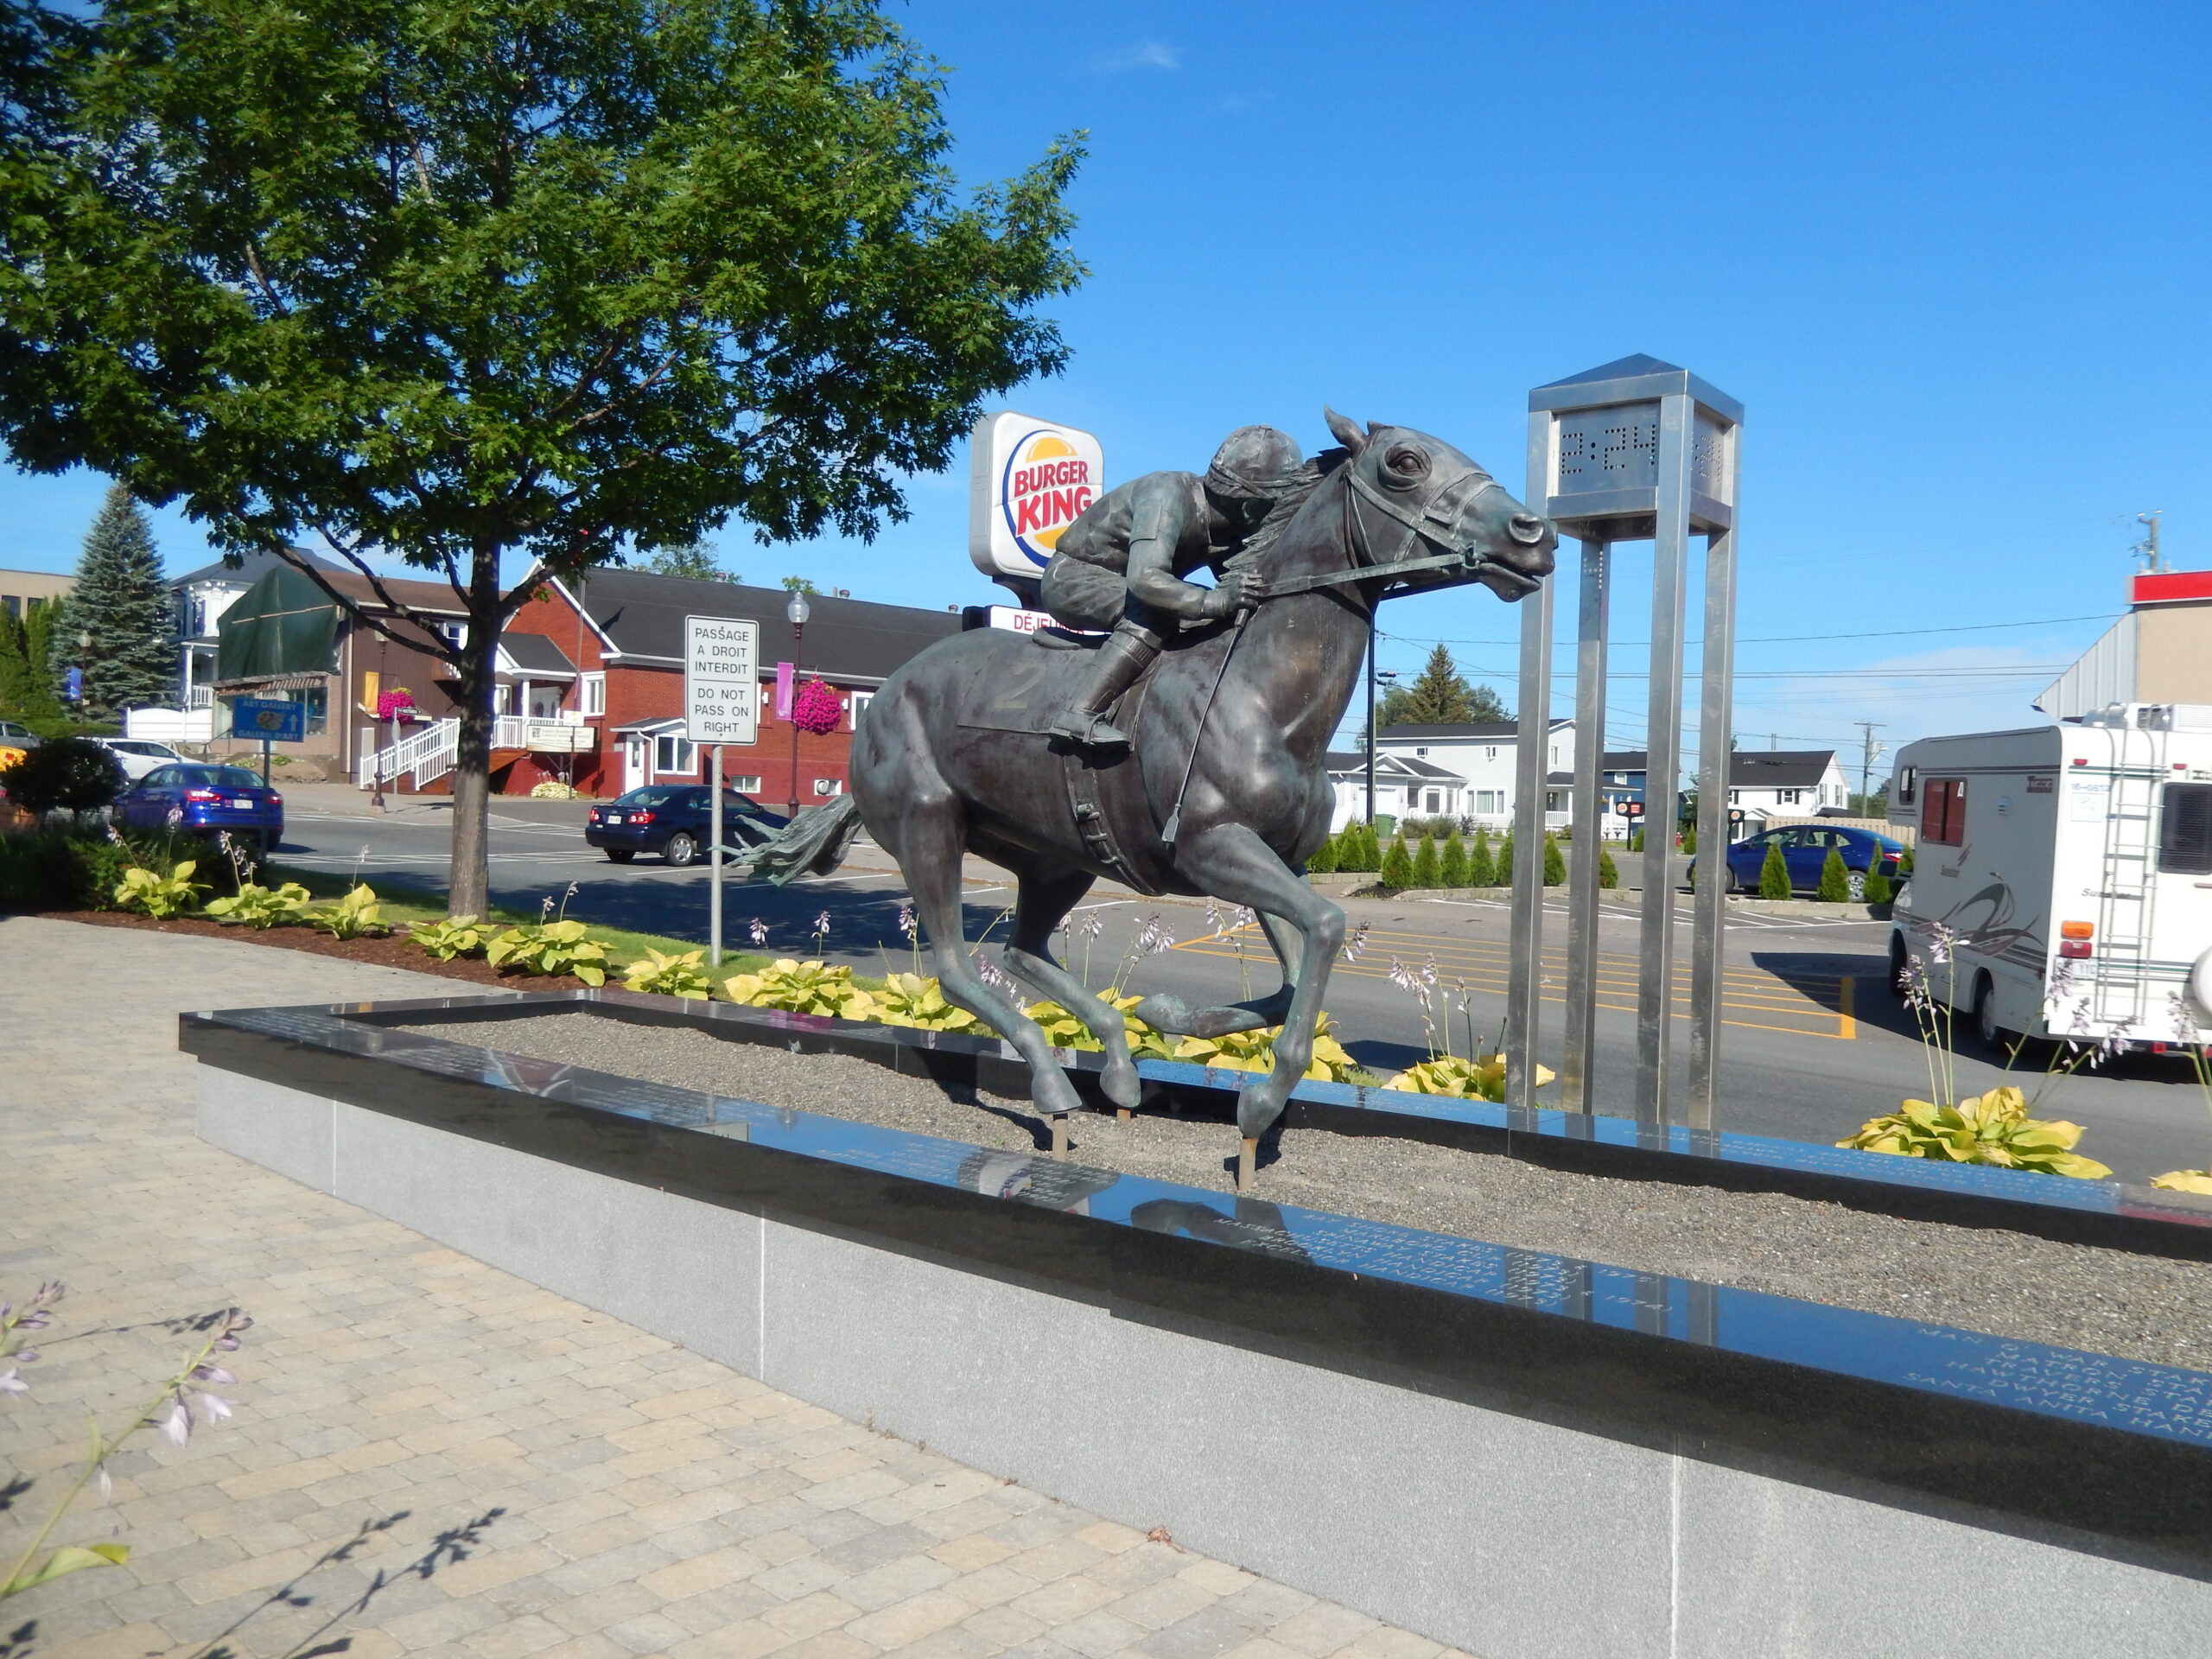 A statue of the race horse Secretariat and his jockey, Ron Turcotte, stands proudly across the street from a Burger King.